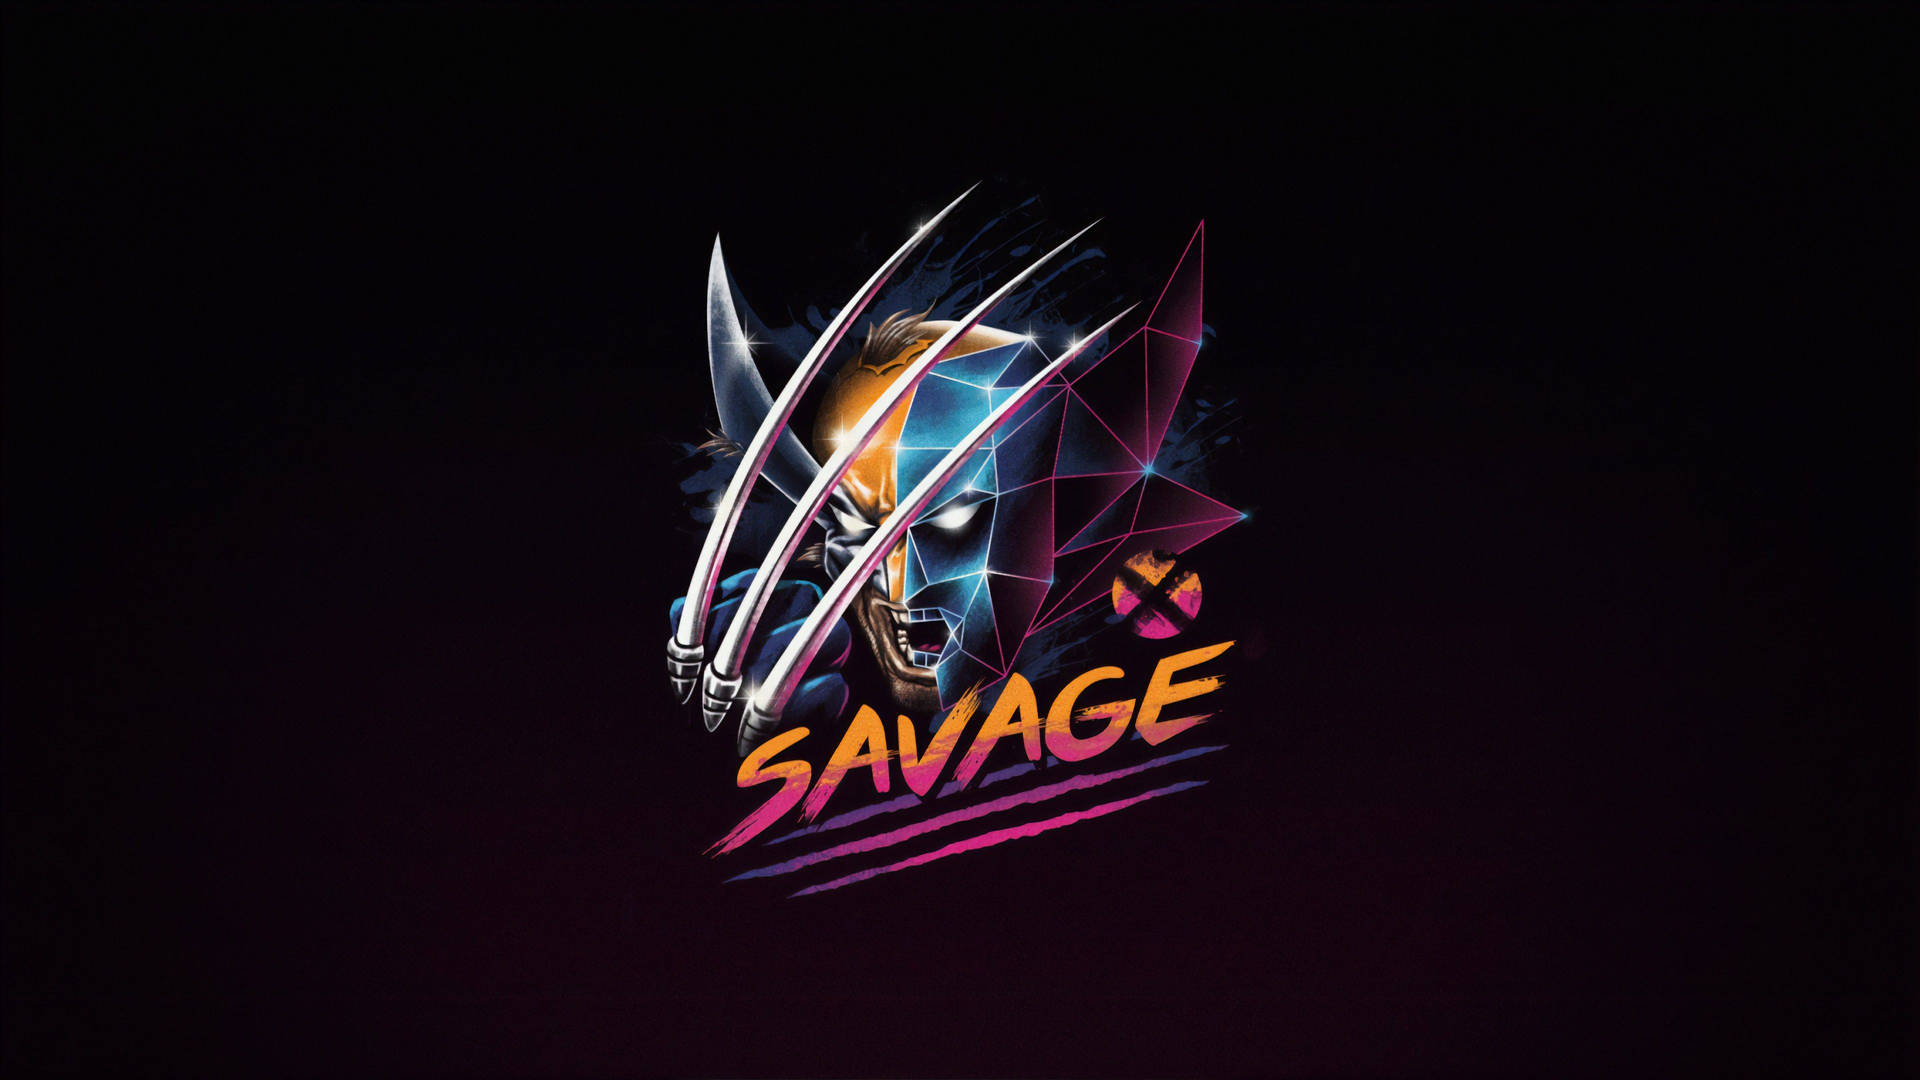 Savage Angry Monster Background